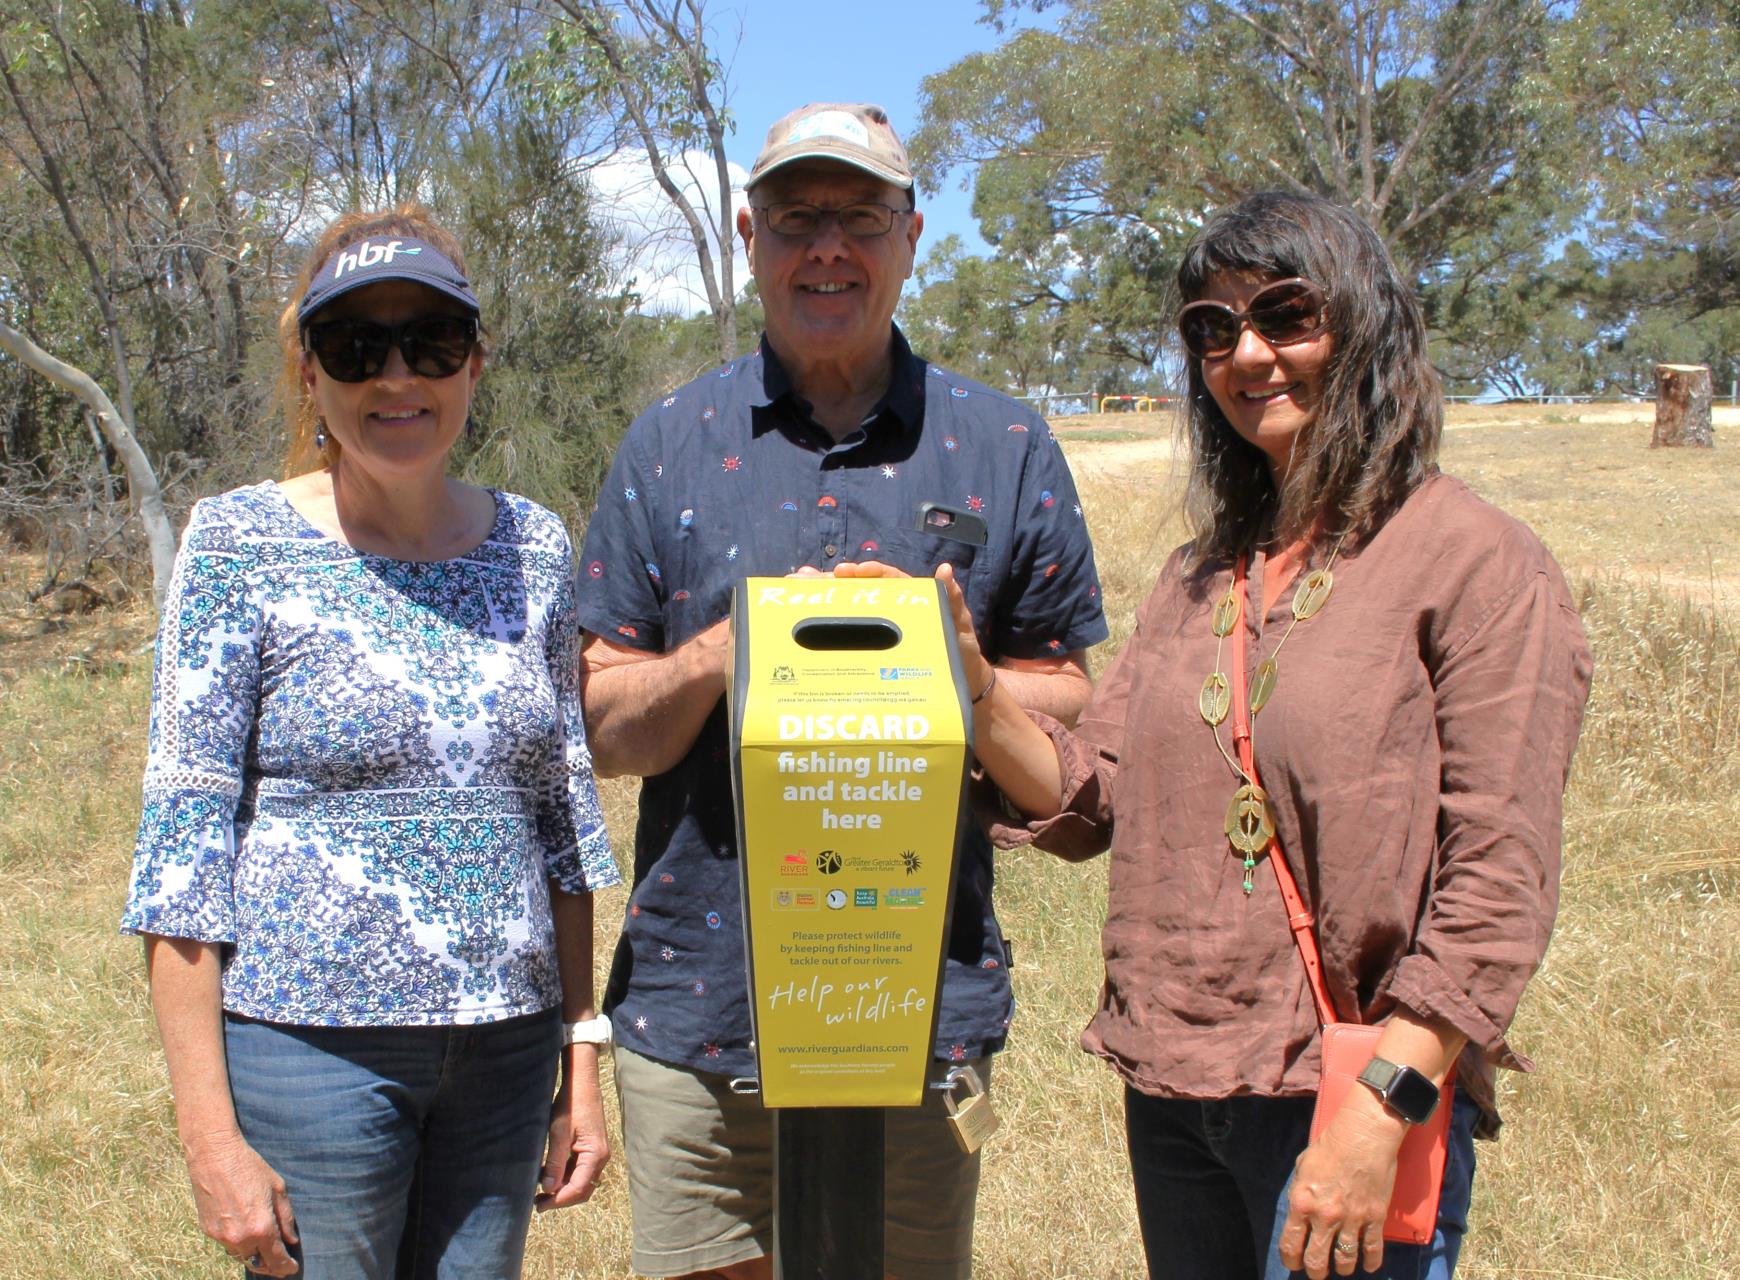 Chapman River Friends Laura Garraway (left), Stuart Estcourt and Virginie Fuhrmann will be assisting the City with emptying, maintaining and reporting bin contents.